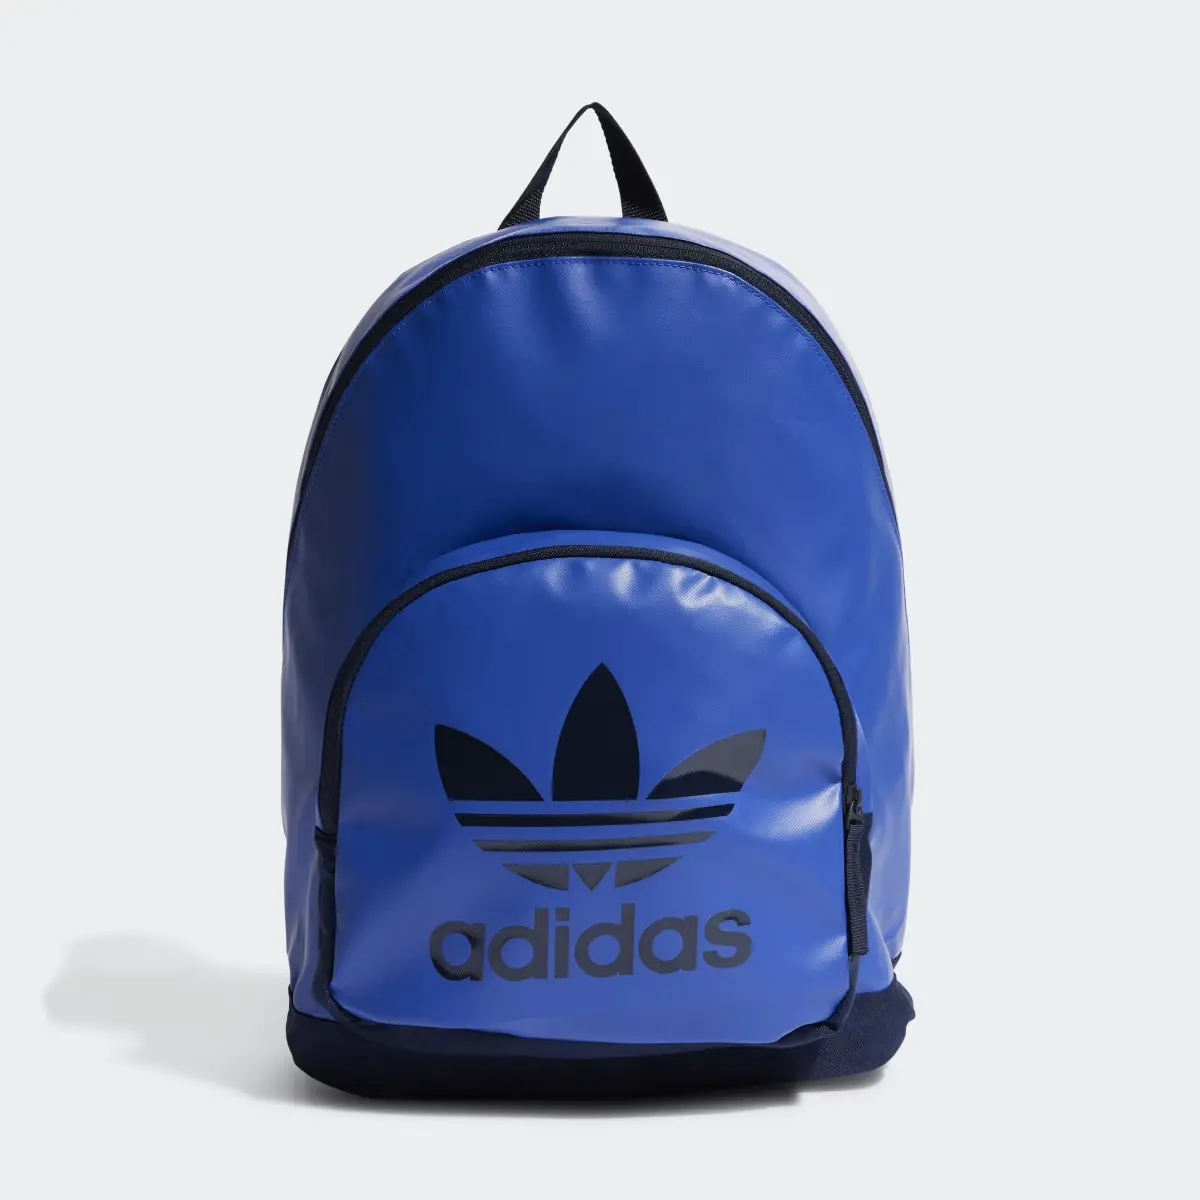 Adidas Adicolor Archive Backpack. 2